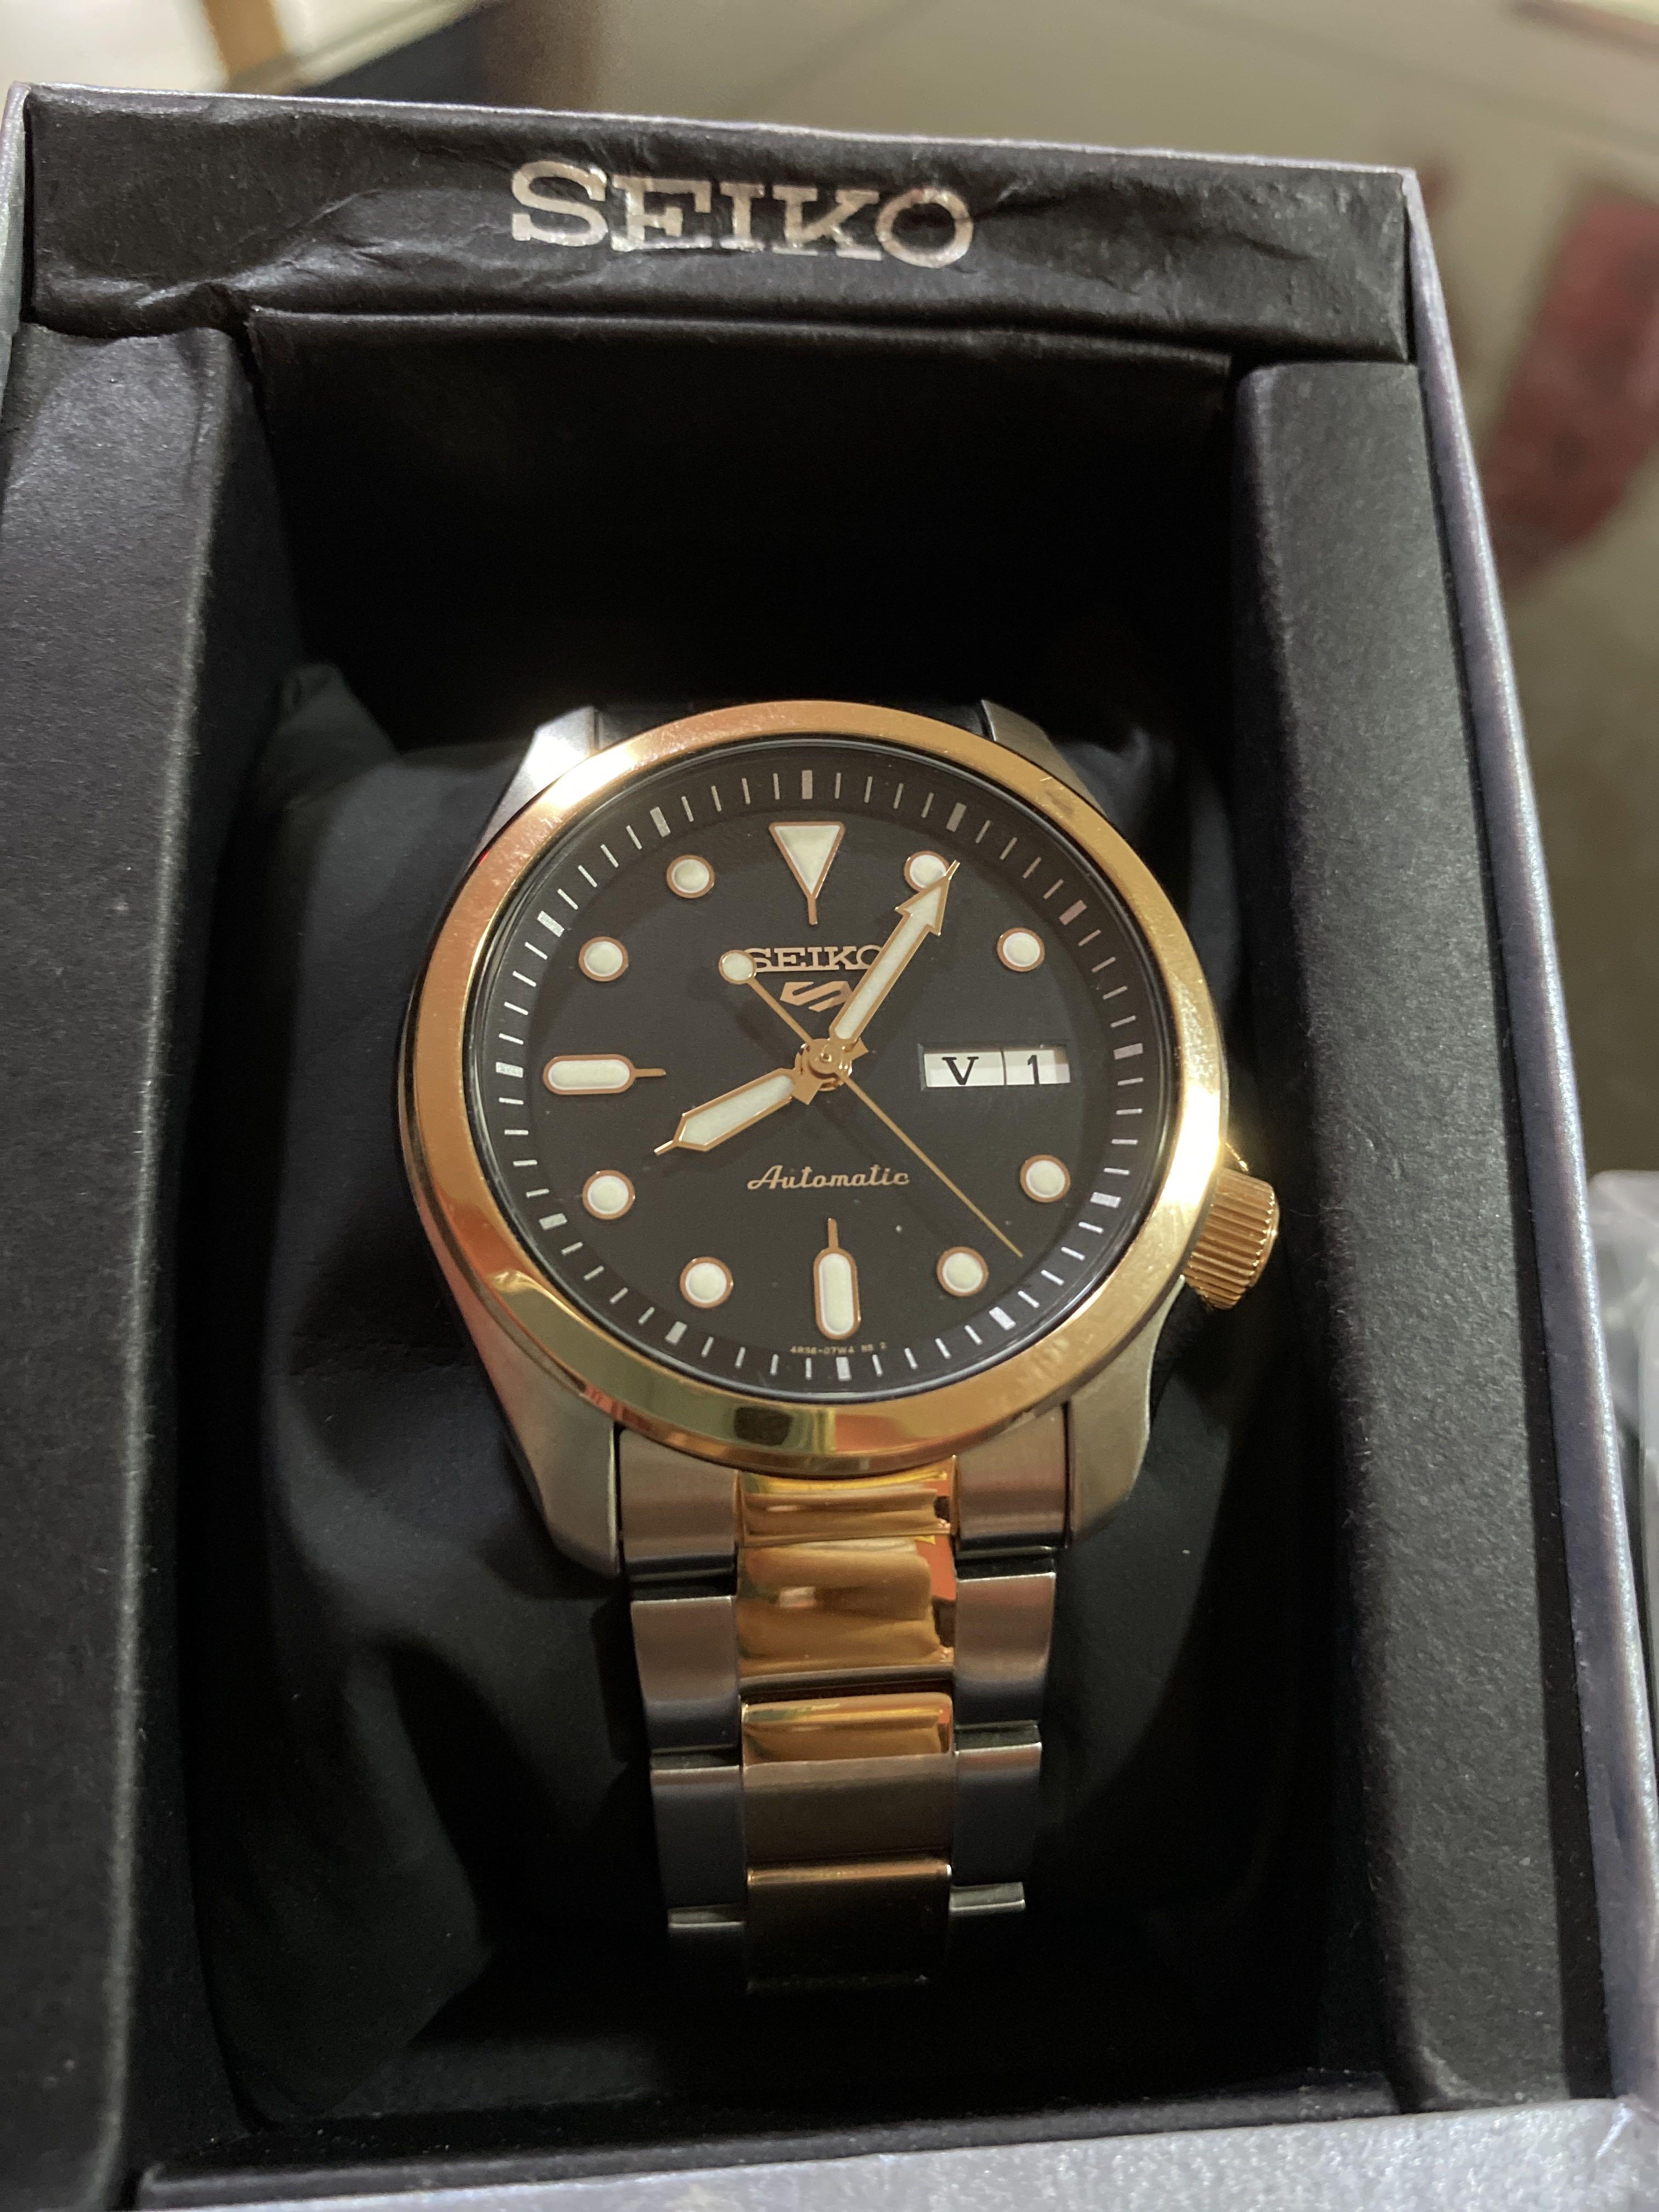 Seiko automatic watch 4R36 - 08L0, Men's Fashion, Watches & Accessories,  Watches on Carousell